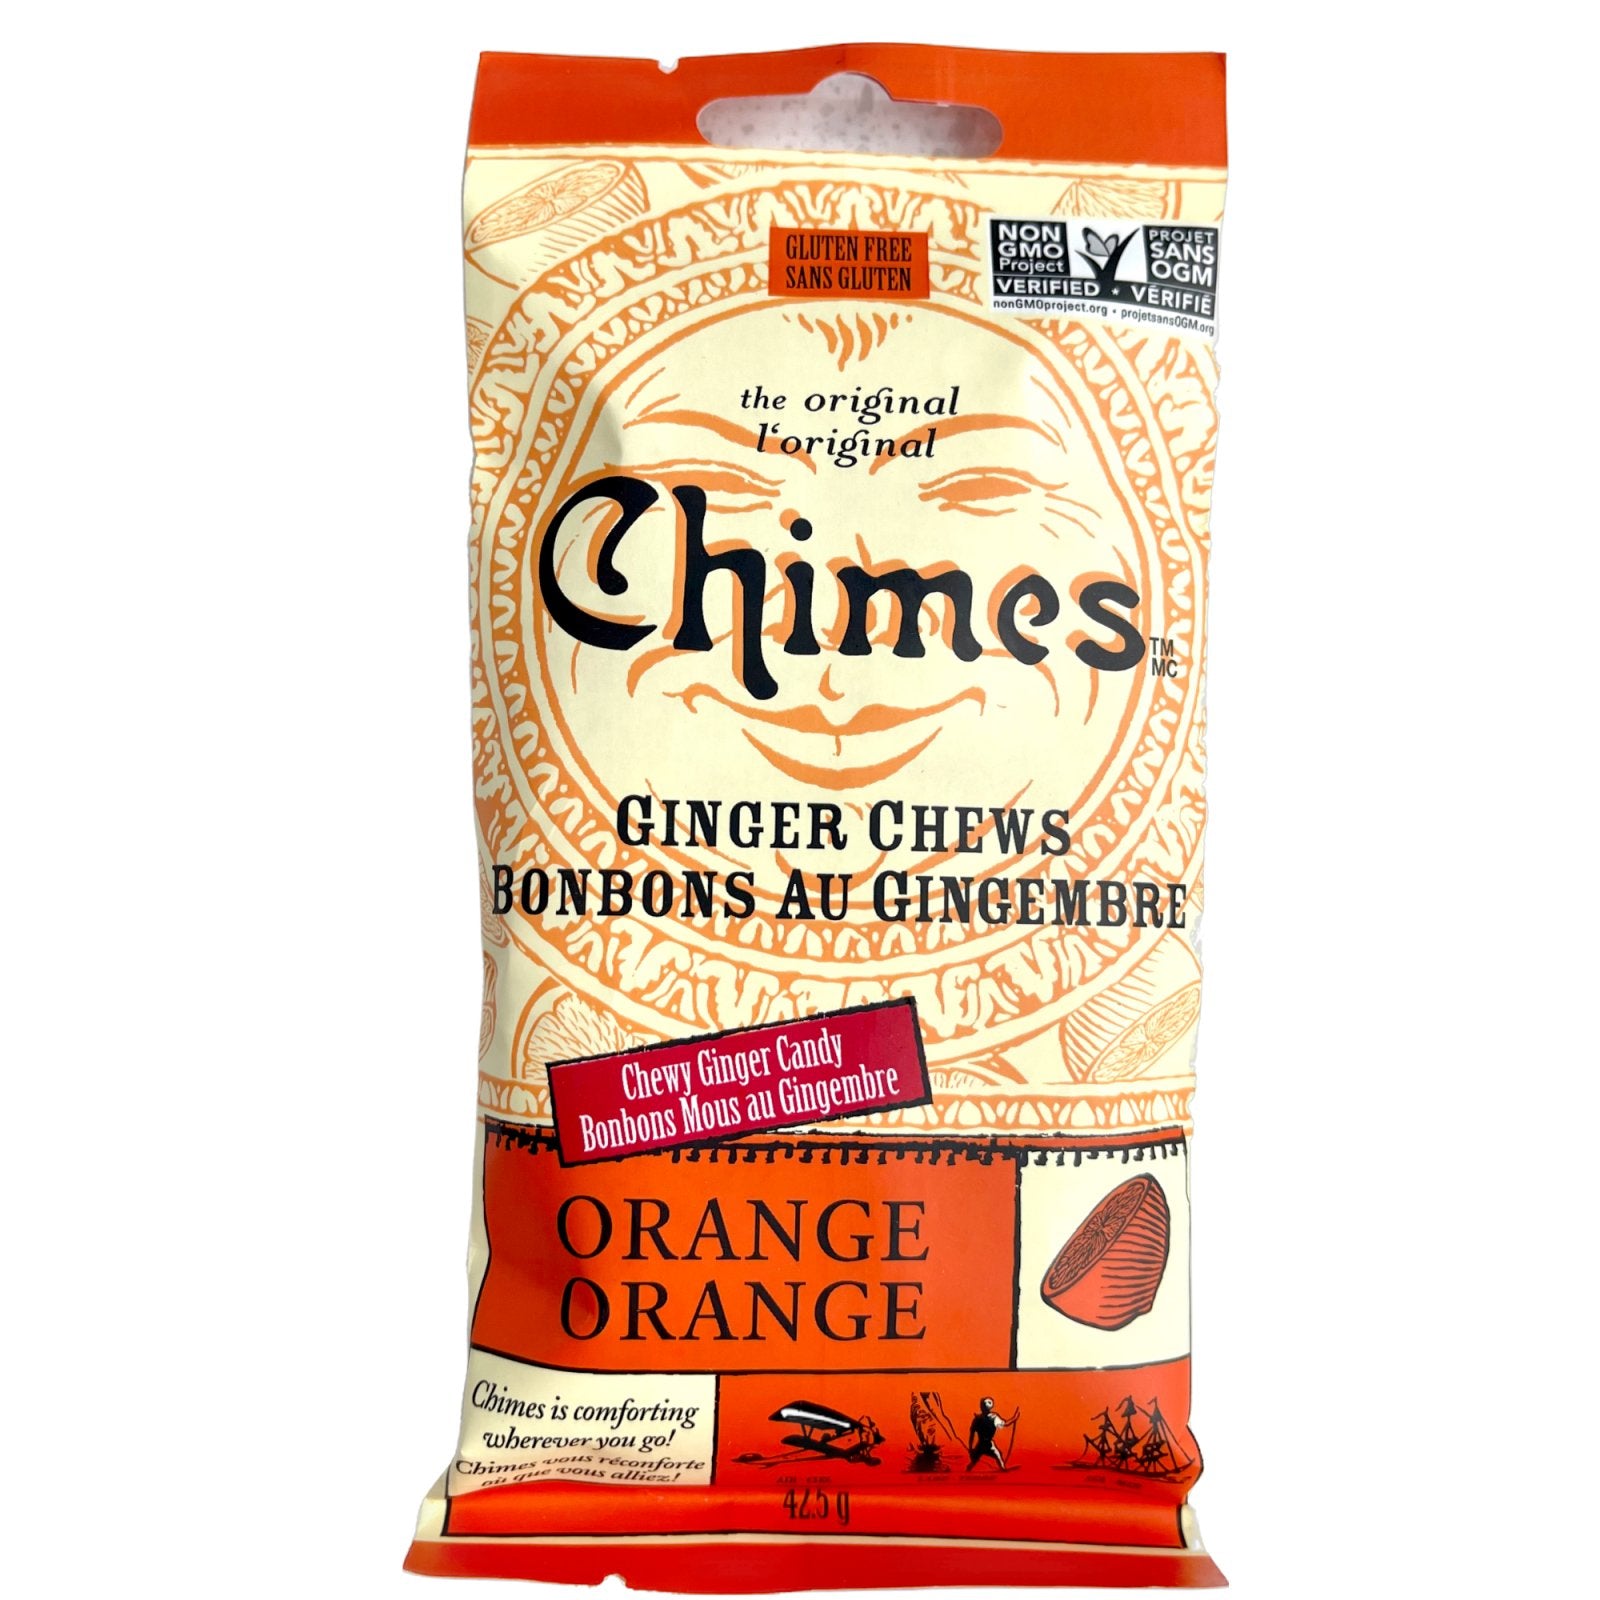 Chimes Chewy Ginger Candy - Orange flavor(42.5g)